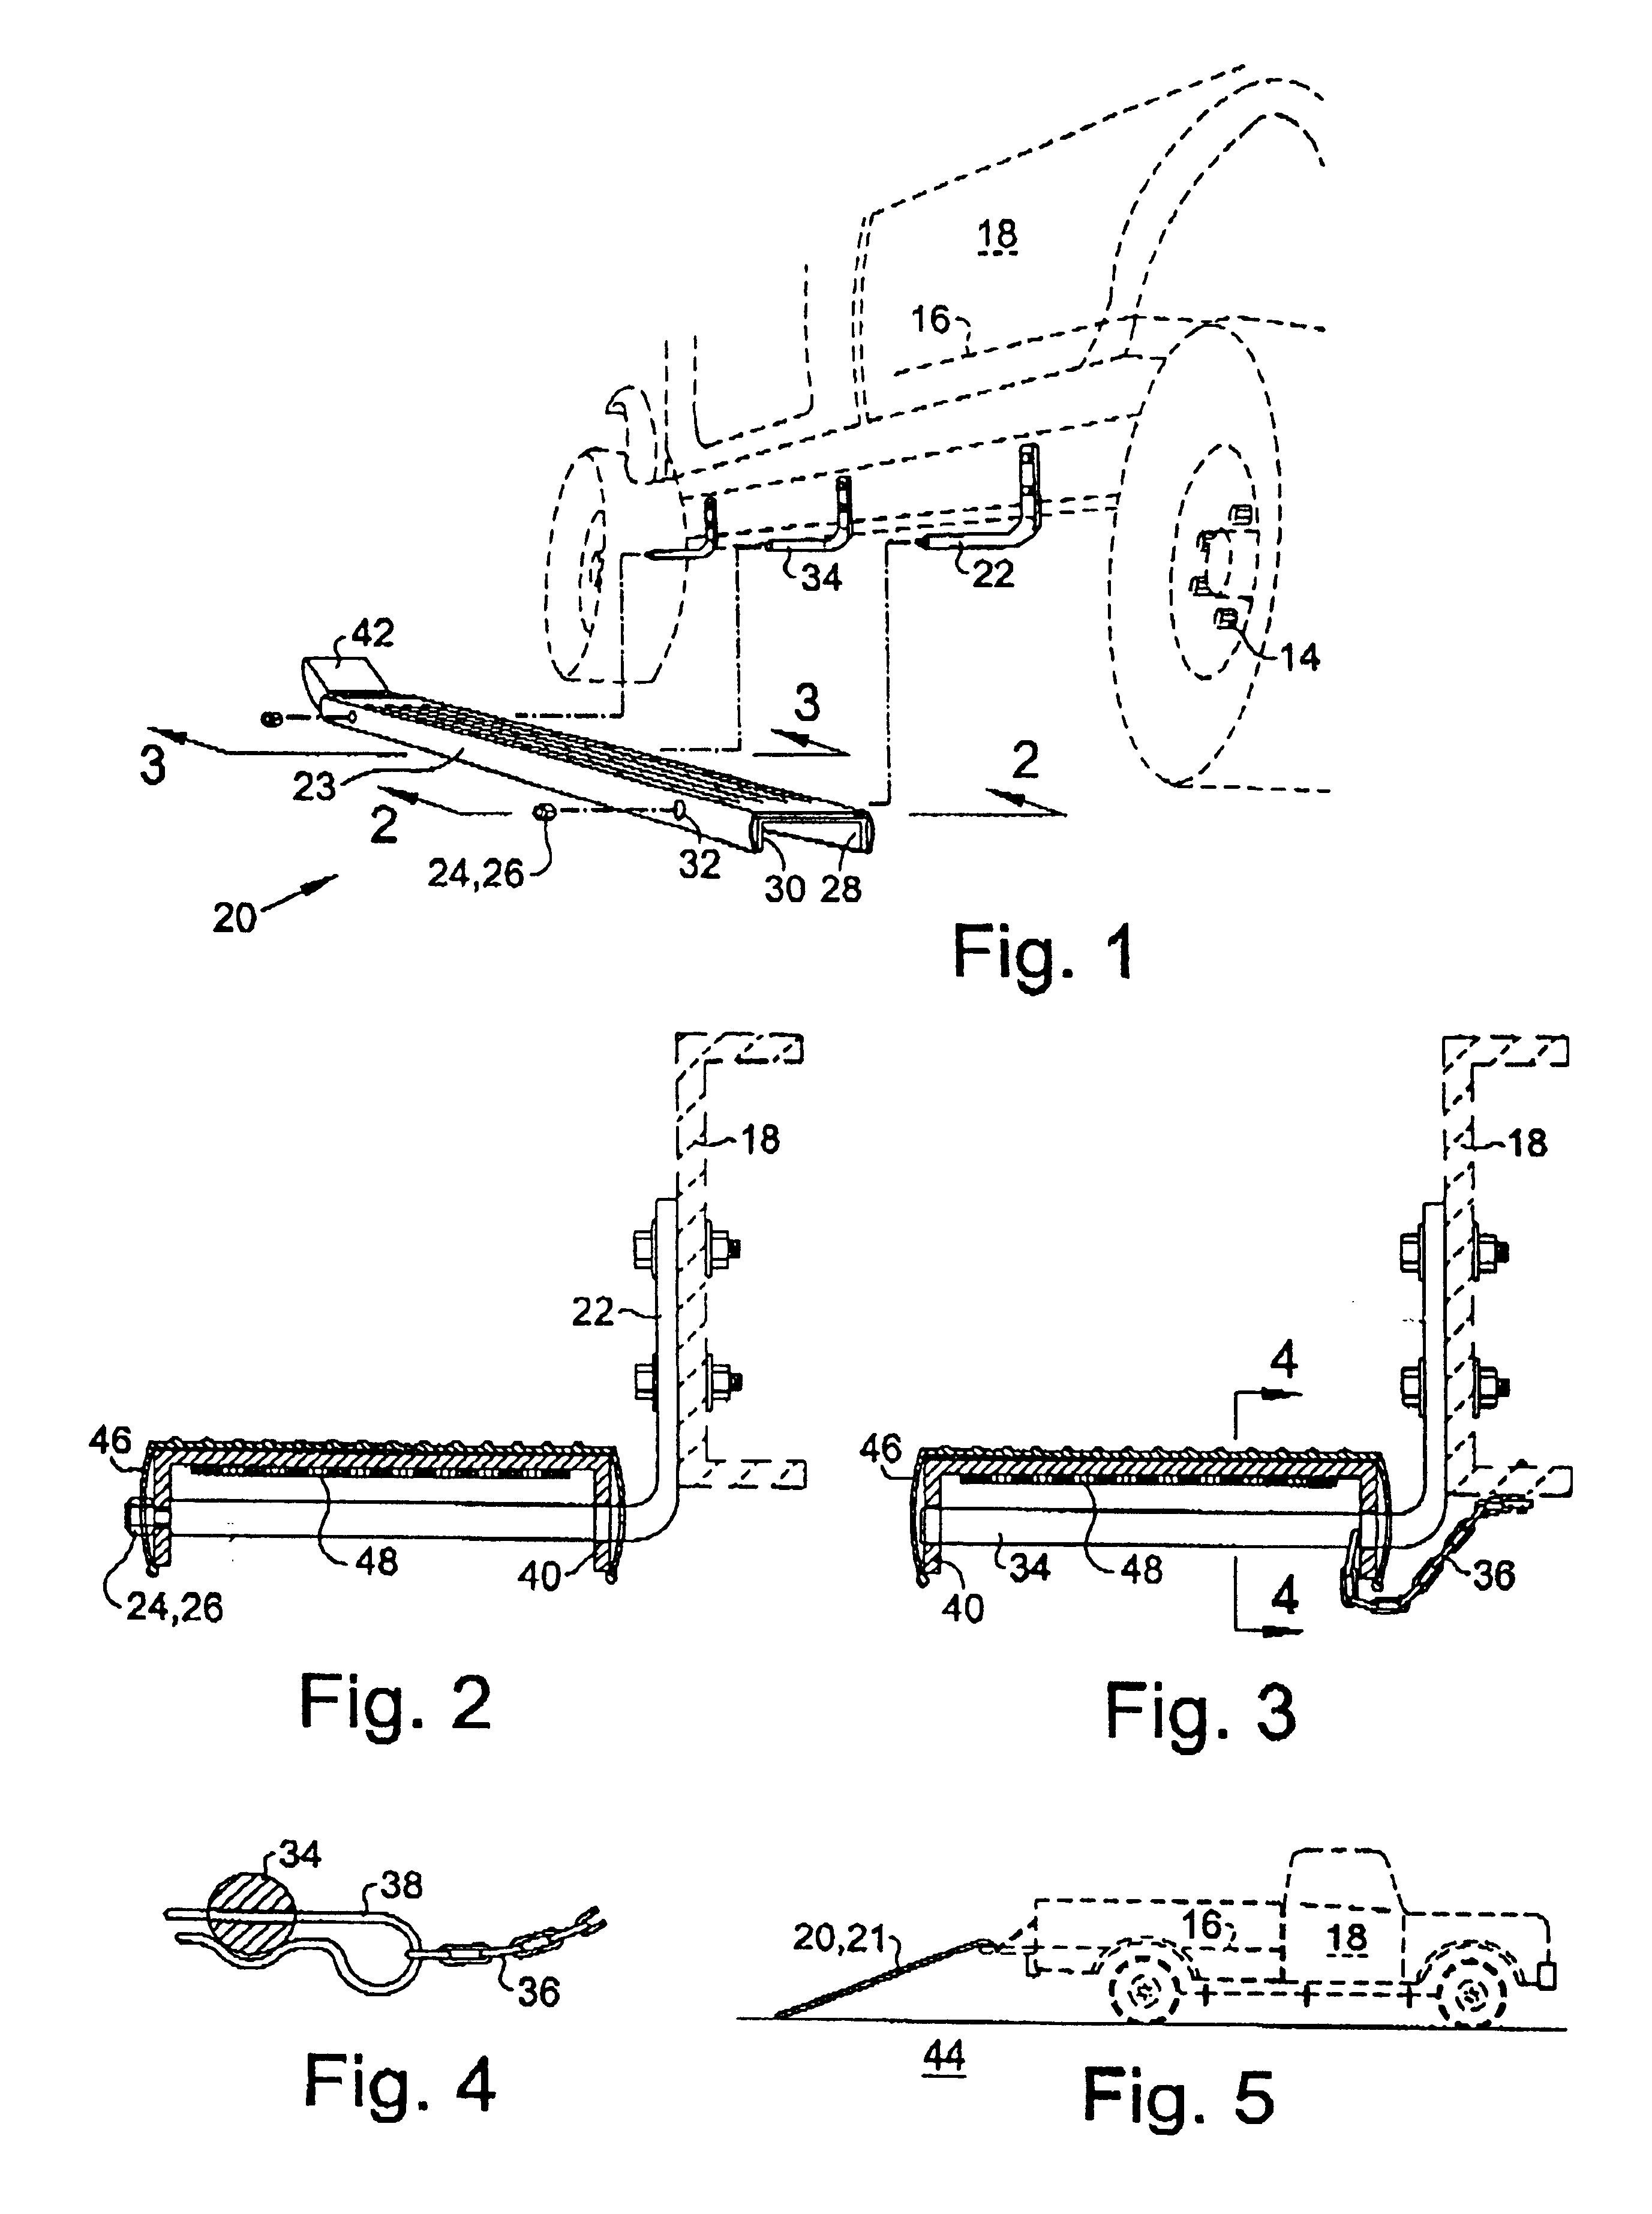 Vehicle running board detachable for use as loading ramp